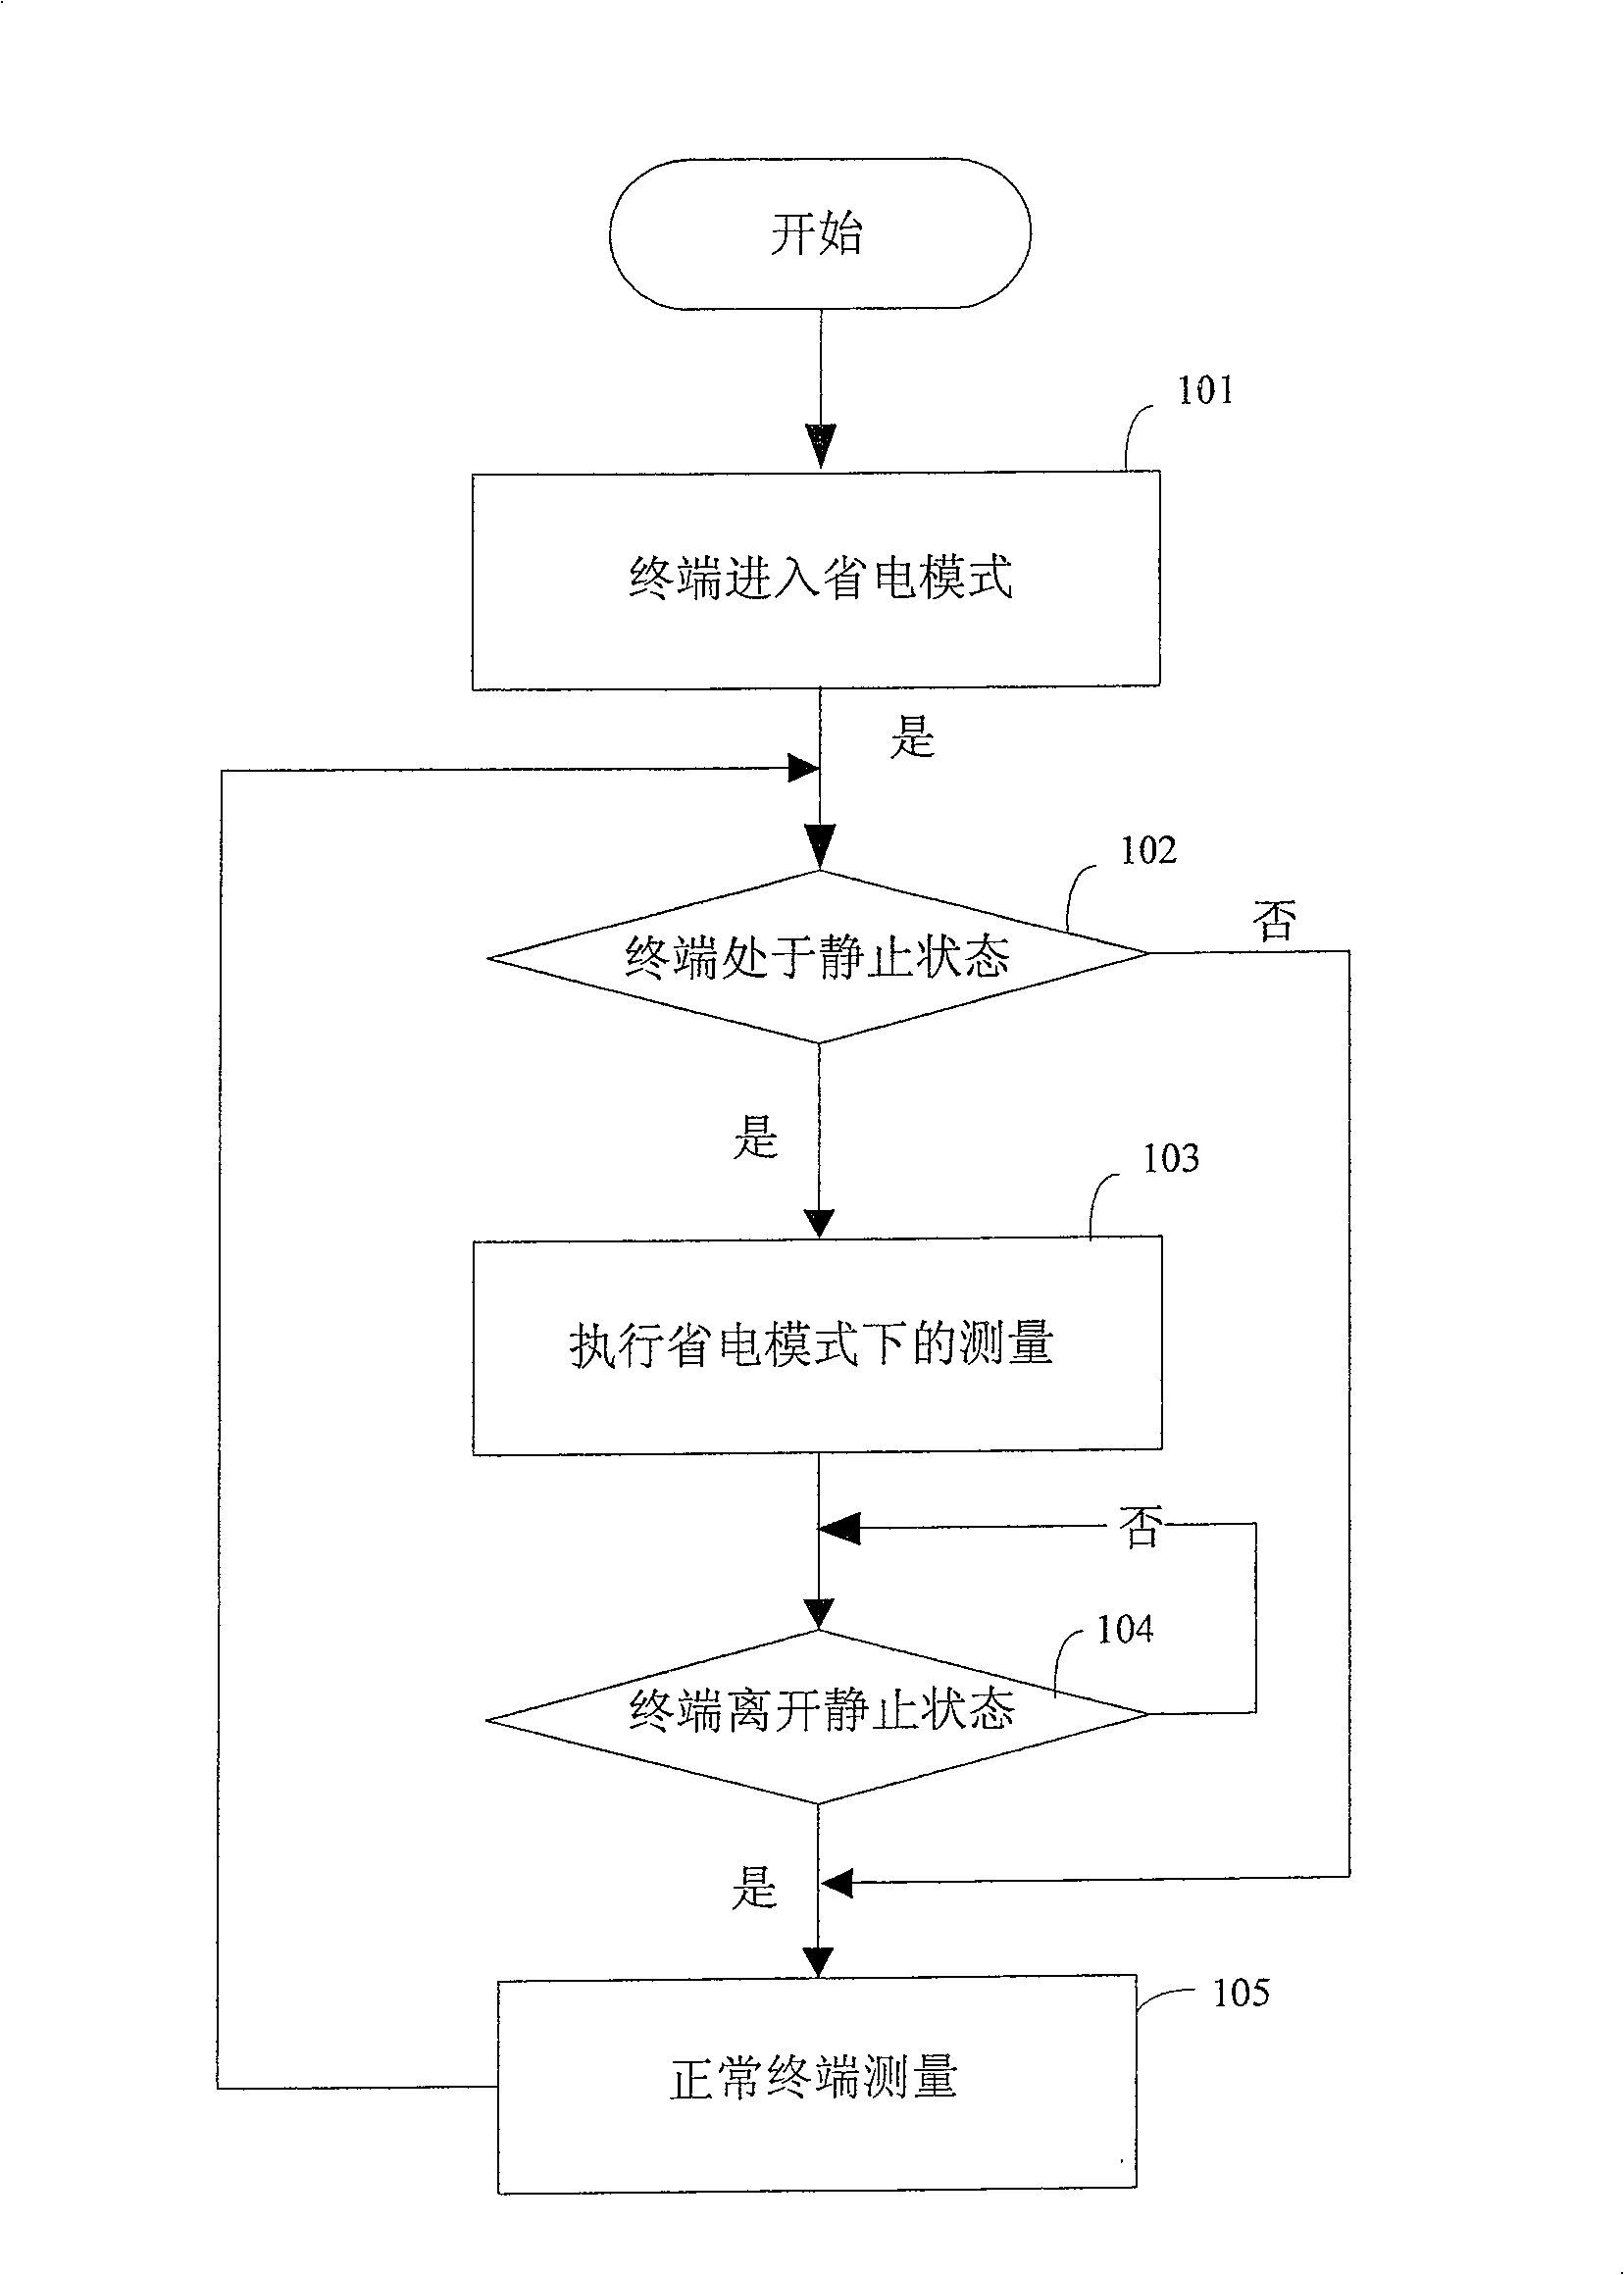 Method and apparatus for realizing electricity saving of mobile terminal